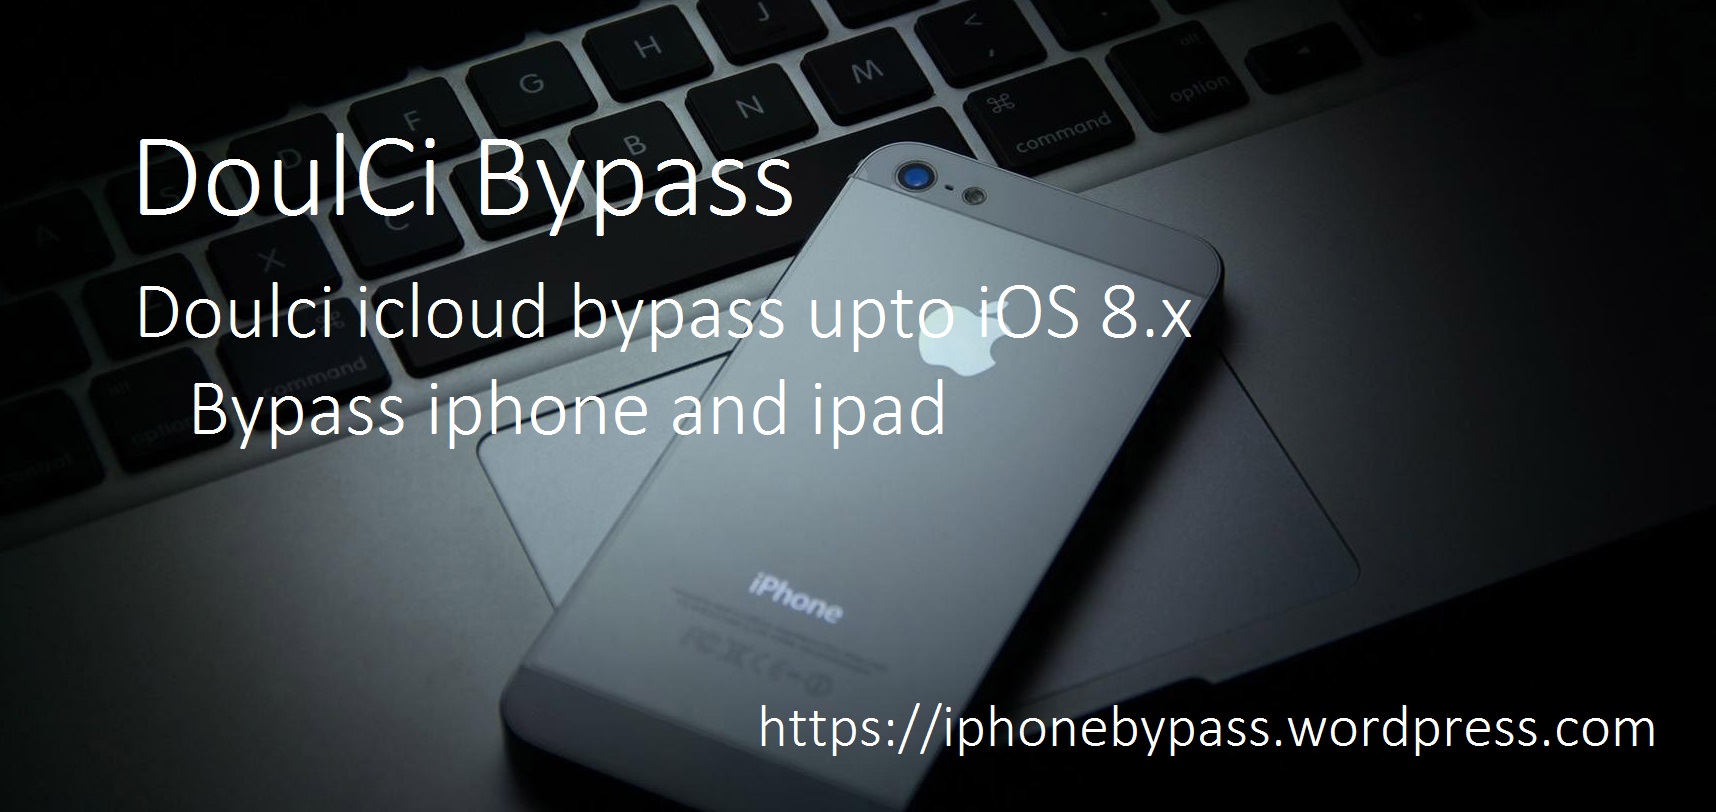 Dolci icloud bypass download windows 7